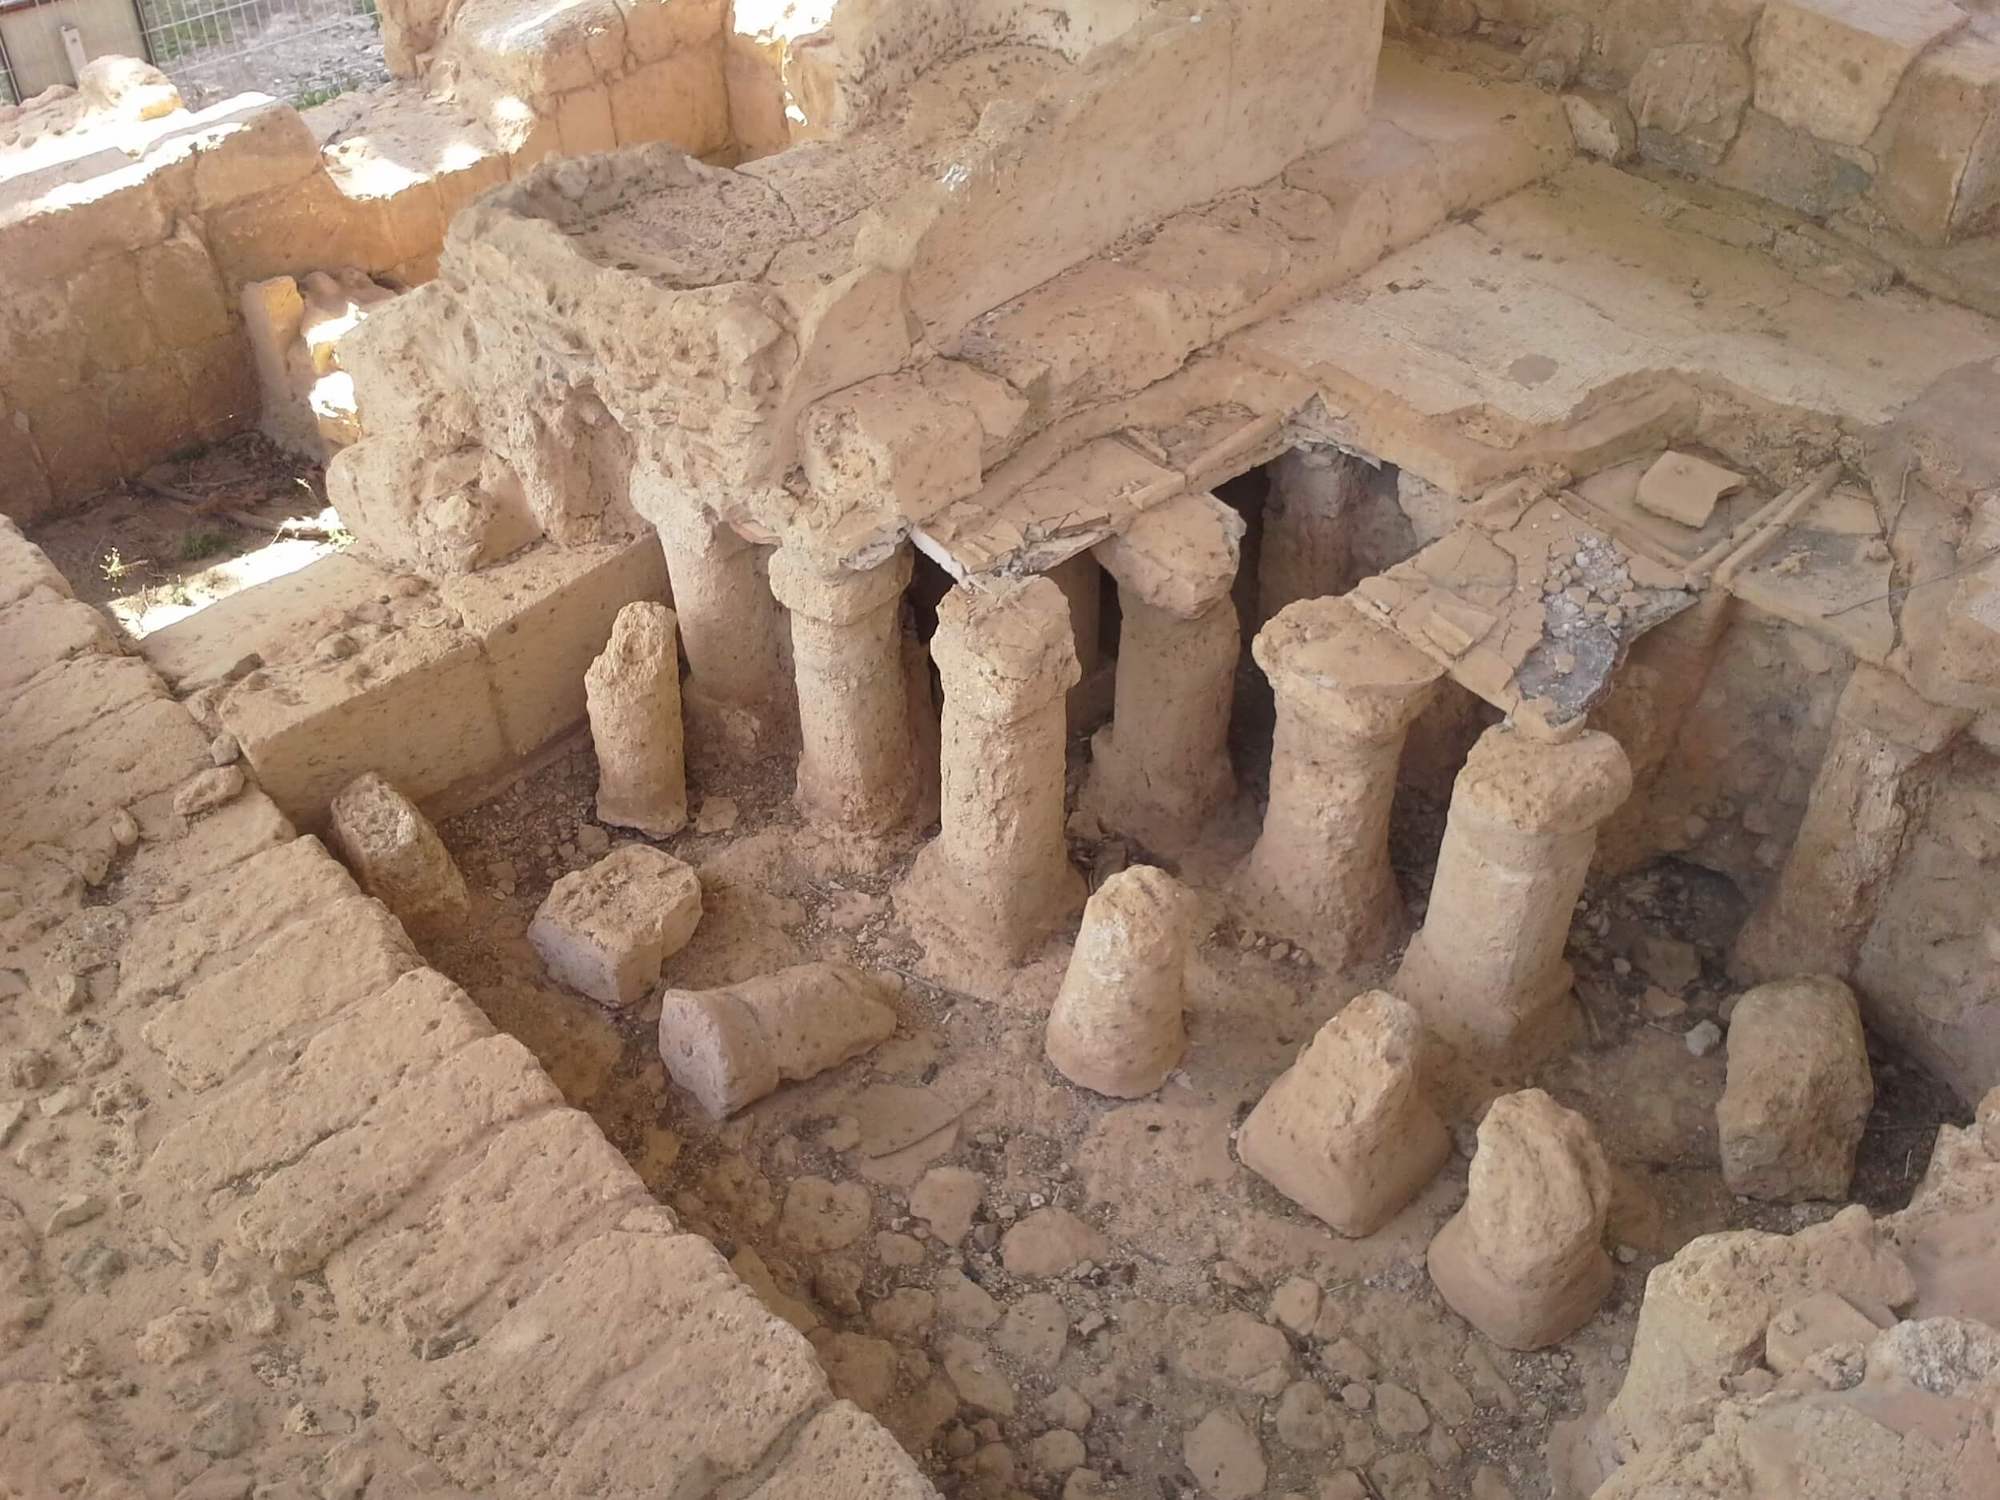 Figure 4: The caldarium (hot room) of the small baths at Ramat haNadiv. Pillars of hypocaust are made of stone, ceramic rooftiles are used to build the upper floor, and a masonry tub for hot water is preserved in part (credit: Arleta Kowalewska).